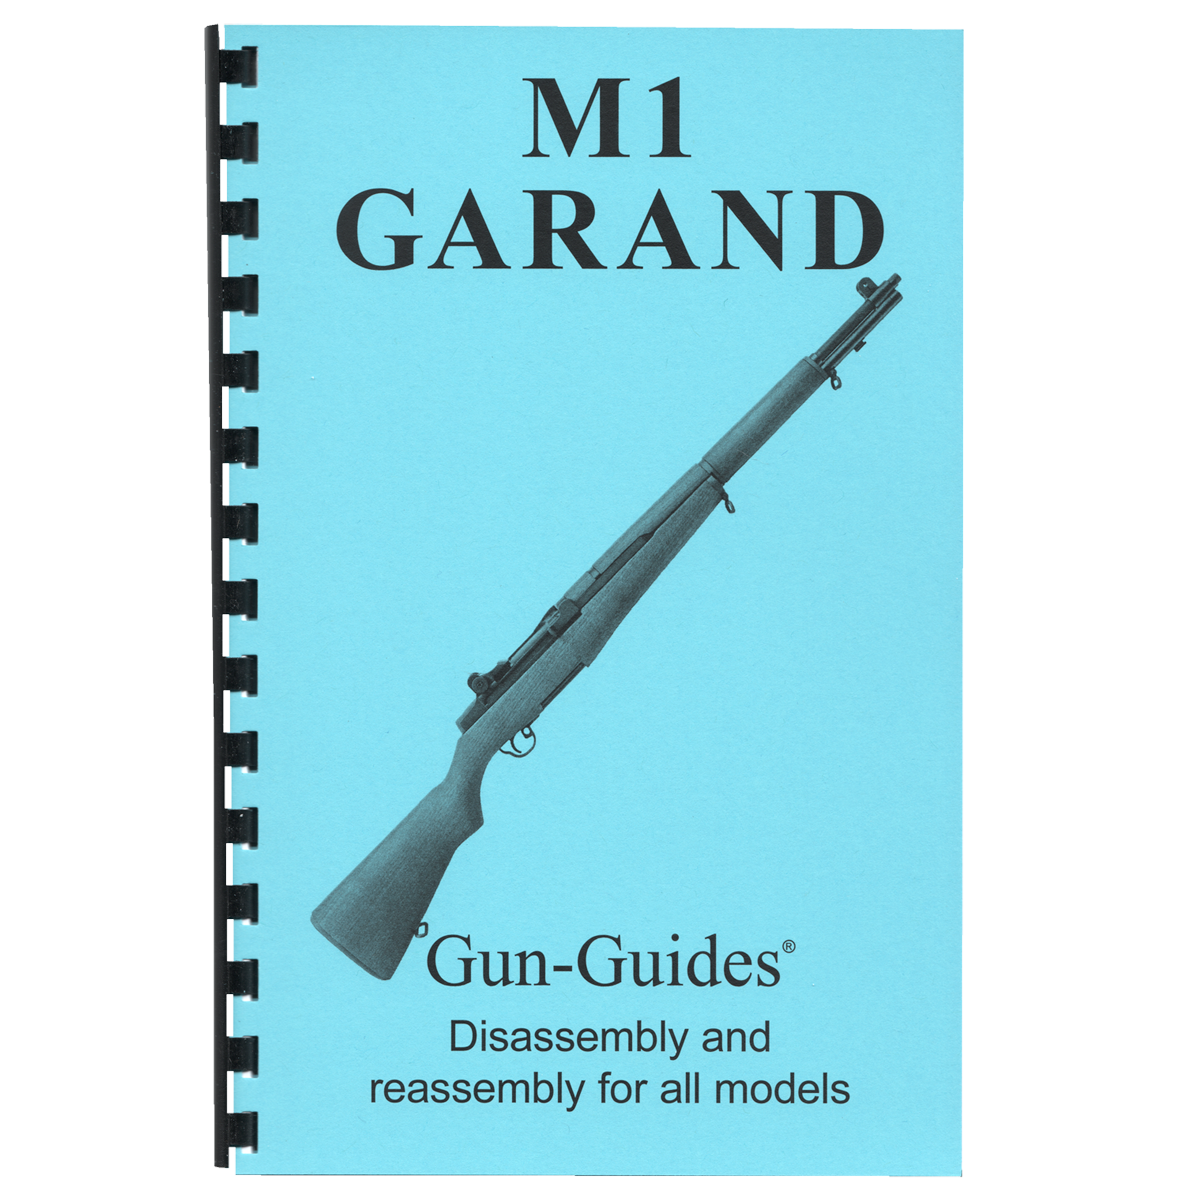 M1 Garand Rifles Gun-Guides® Disassembly & Reassembly for All Models